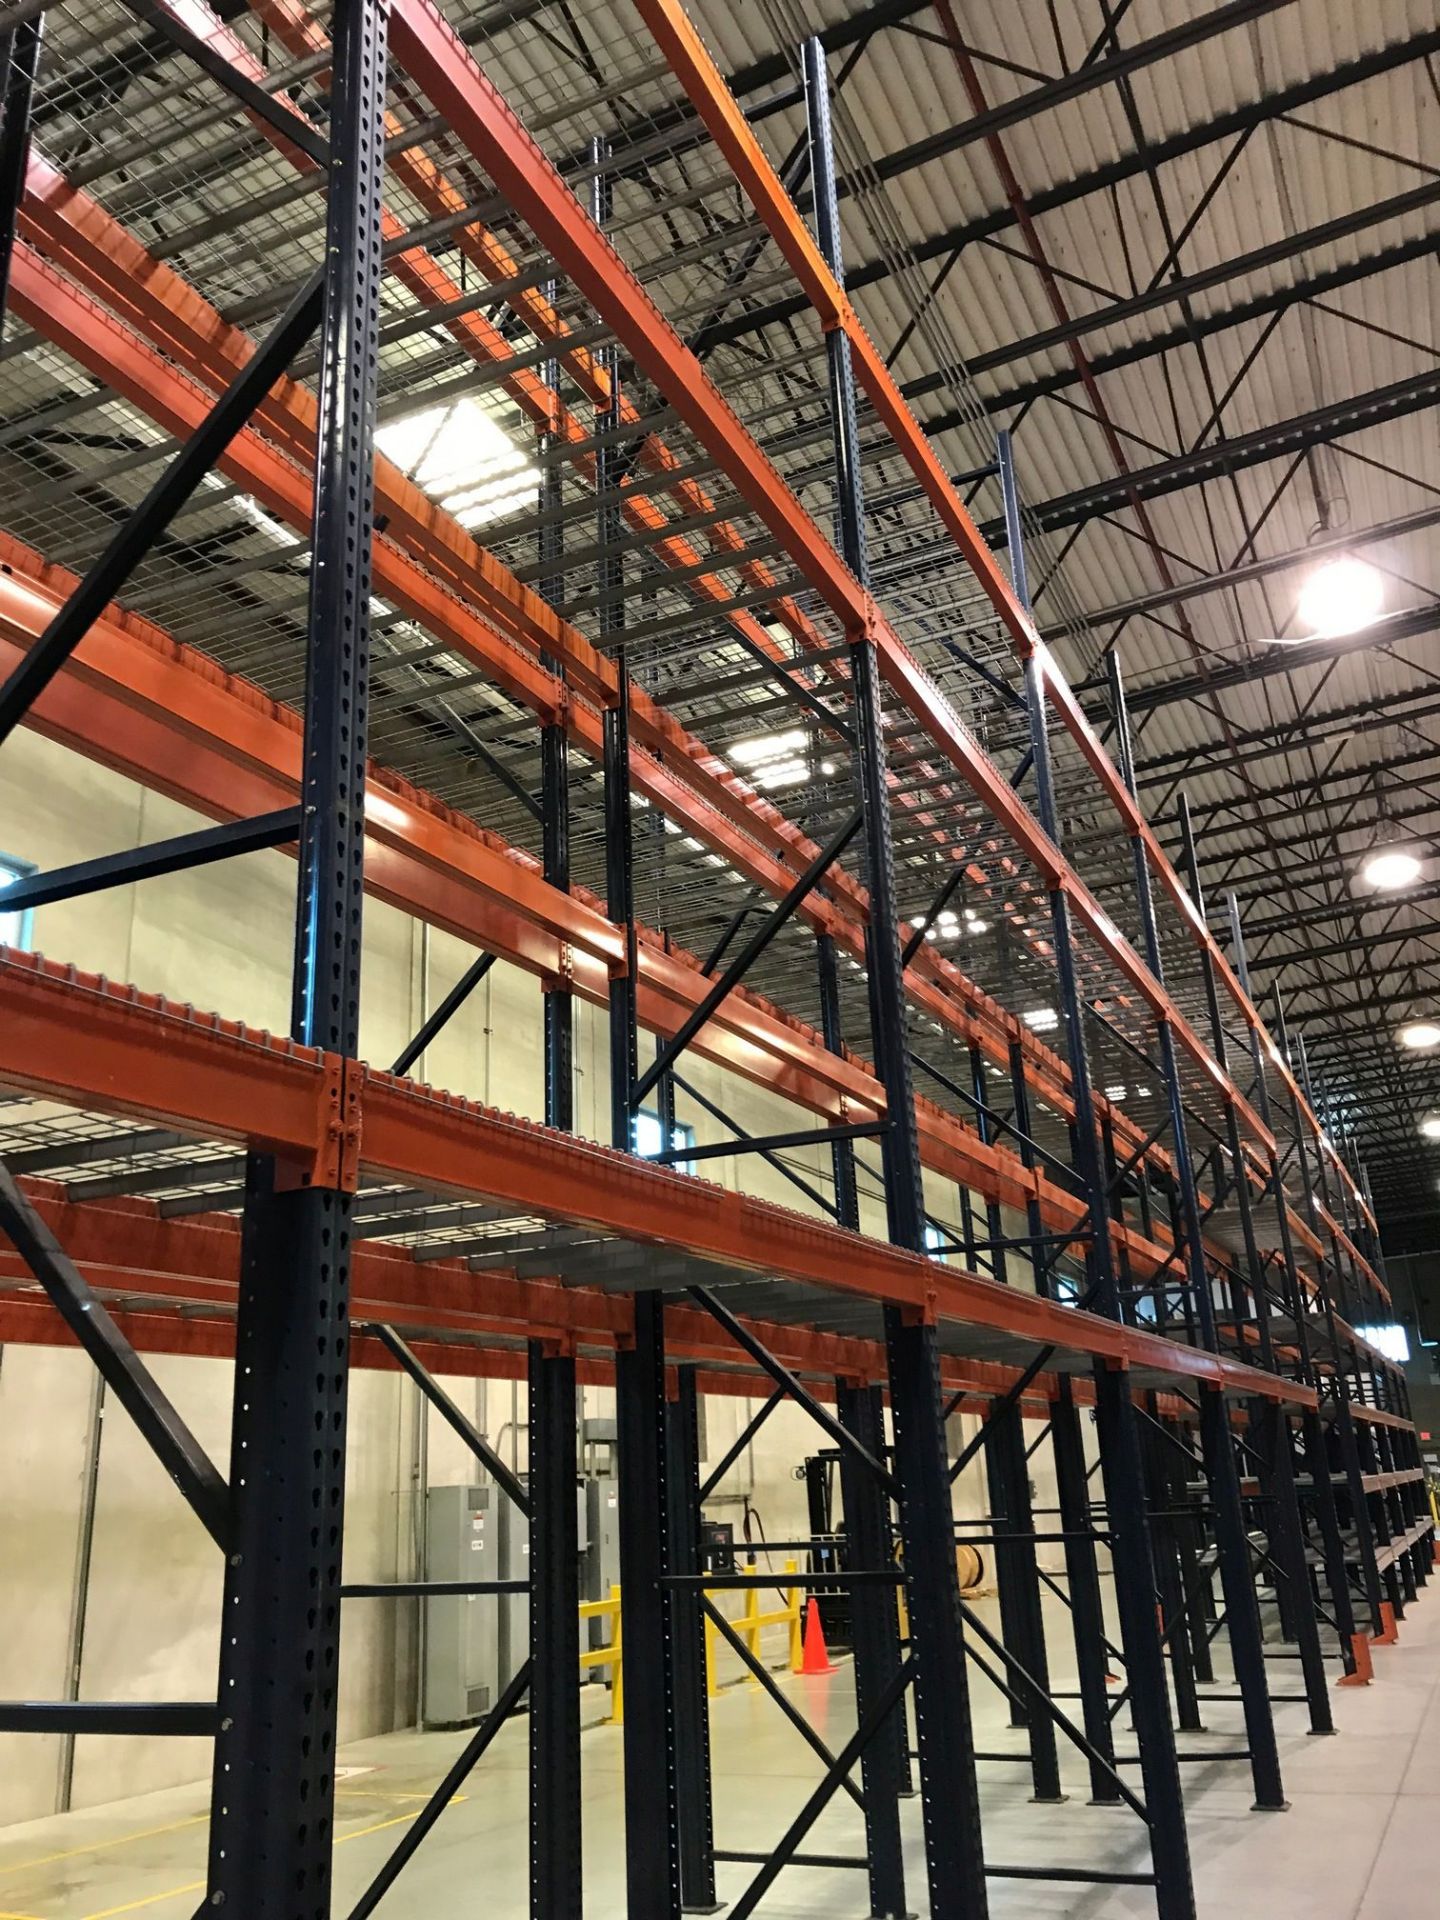 SECTIONS 60" X 108" X 288" TEARDROP TYPE ADJUSTABLE BEAM PALLET RACK WITH WIRE DECKING, 6" HIGH - Image 10 of 16